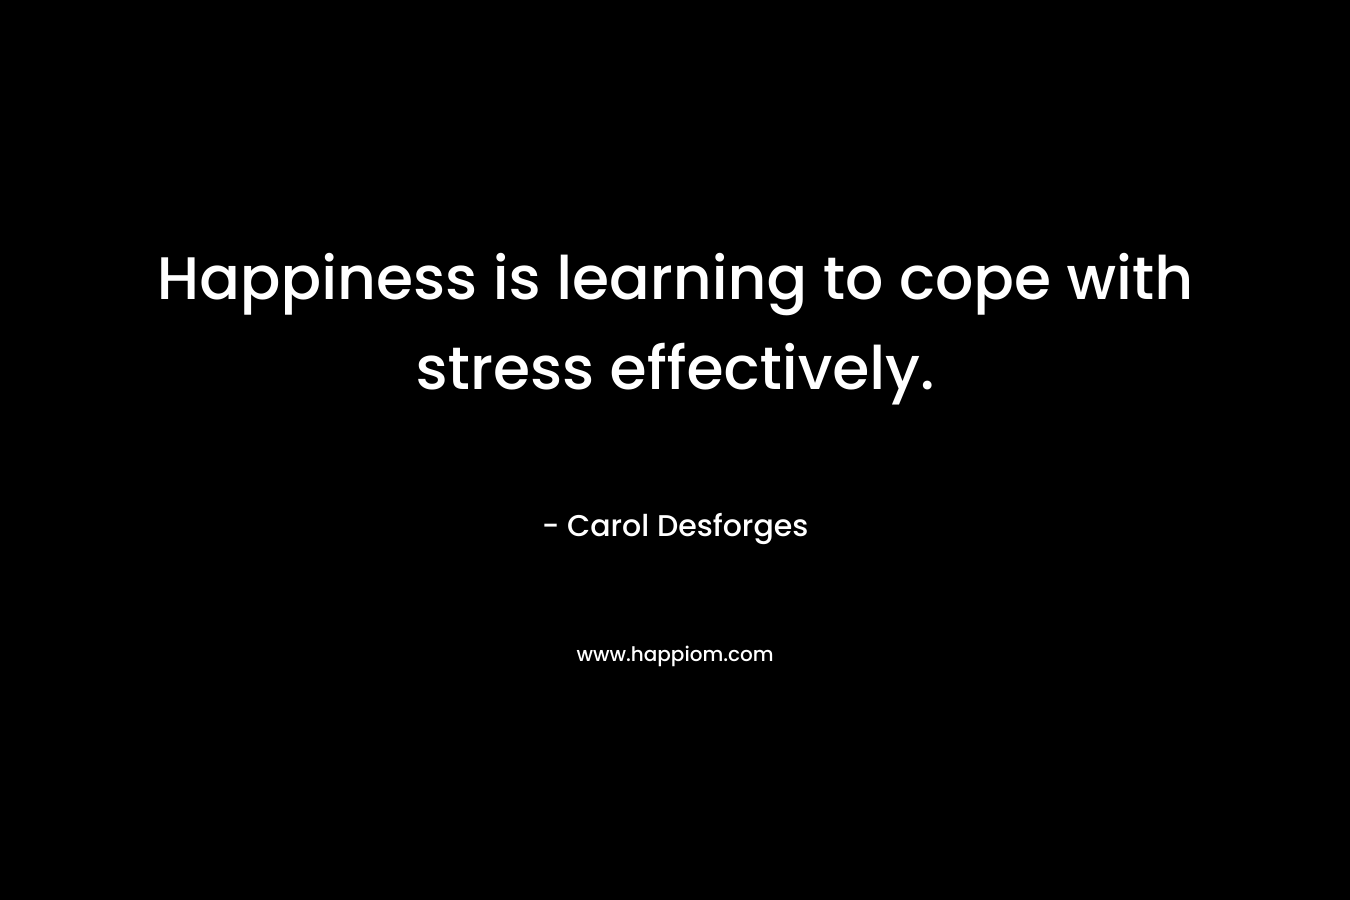 Happiness is learning to cope with stress effectively.